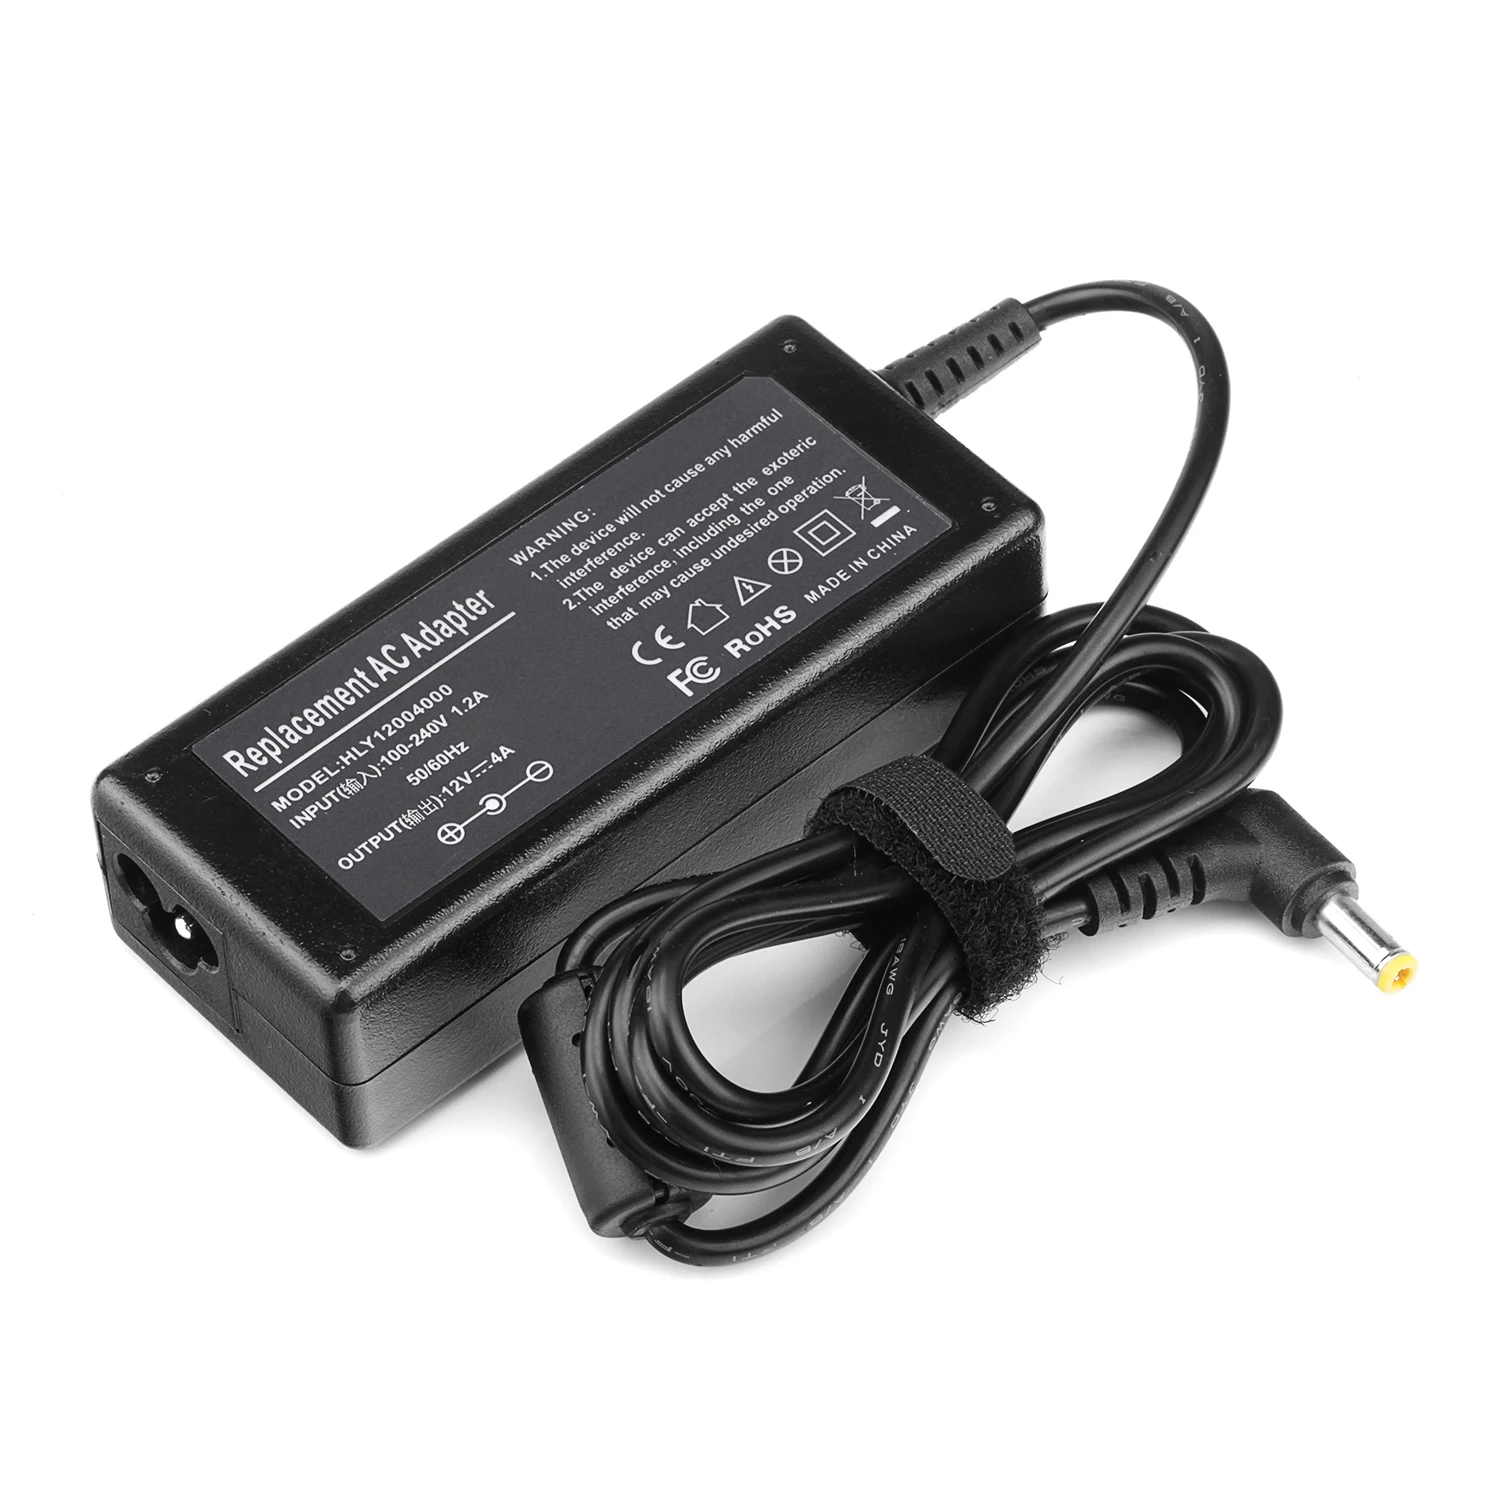 Rendezvous doolhof Diversiteit Ac Dc Adapter 12v 4a 36w Power Supply Adapter For Led Lcd Cctv - Buy 12va  Ac Dc Power Adapter,Power Adapter For Led Light,12v 400ma Ac Power Adapter  Product on Alibaba.com